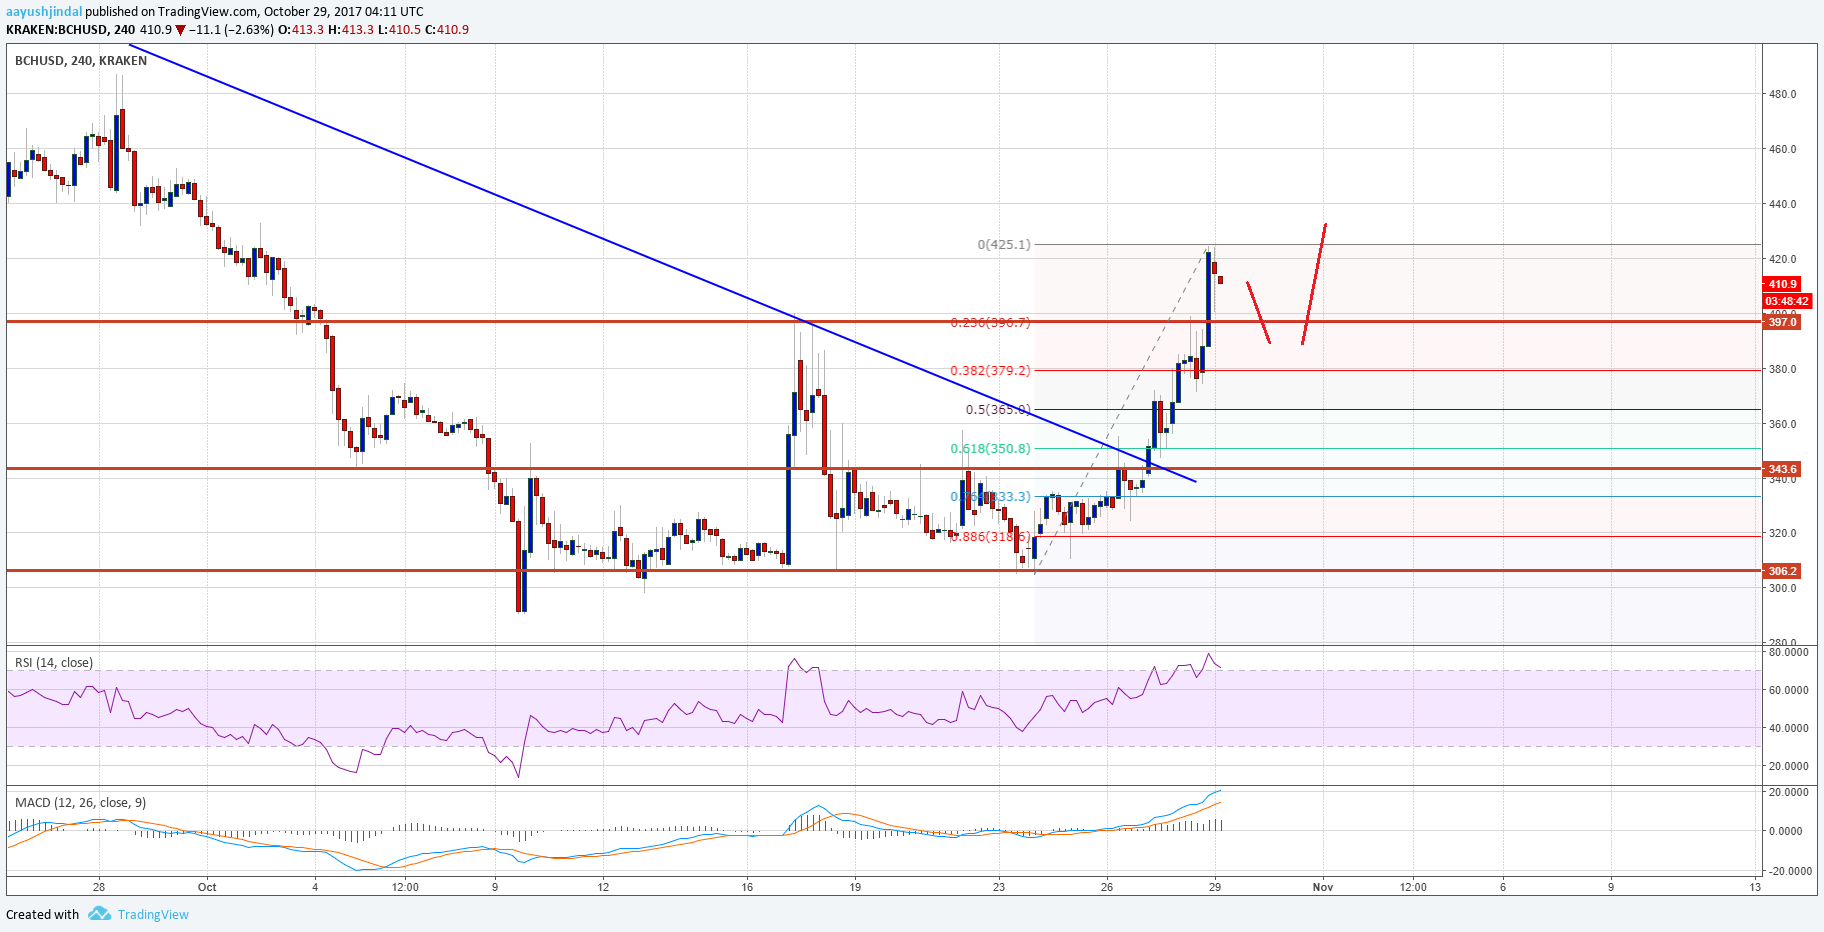 Bitcoin Cash Price Weekly Analysis – BCH/USD Breaks Key Resistance